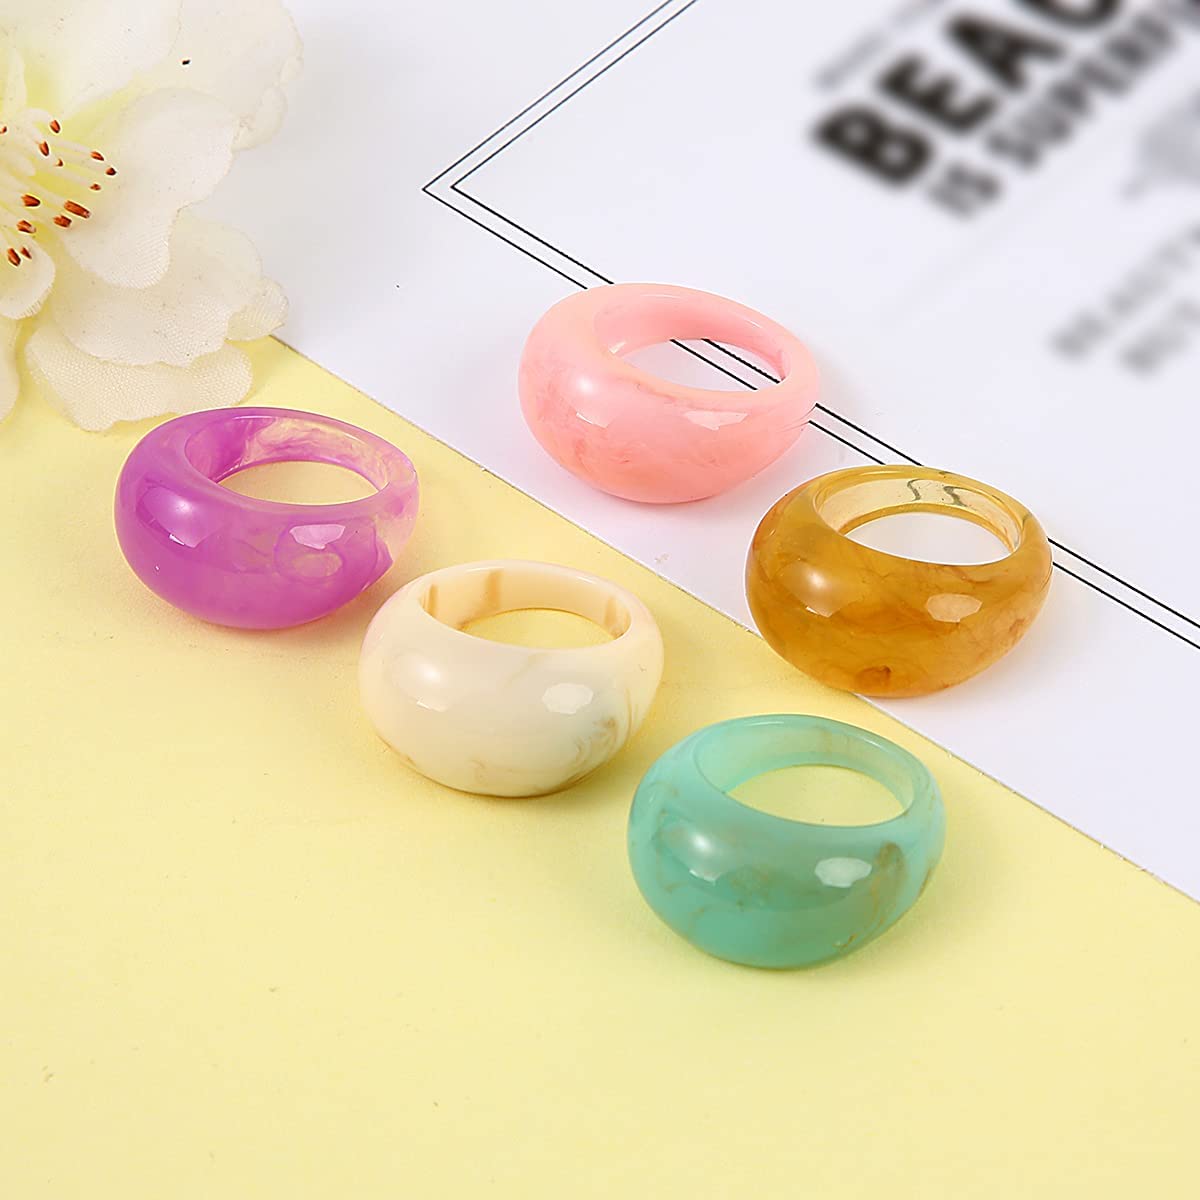 20 Pcs Resin Rings Acrylic Cute Trendy Rings Colorful Rhinestone Rings Jewelry Plastic Resin Square Gem Stackable Chunky Ring for Women Girls